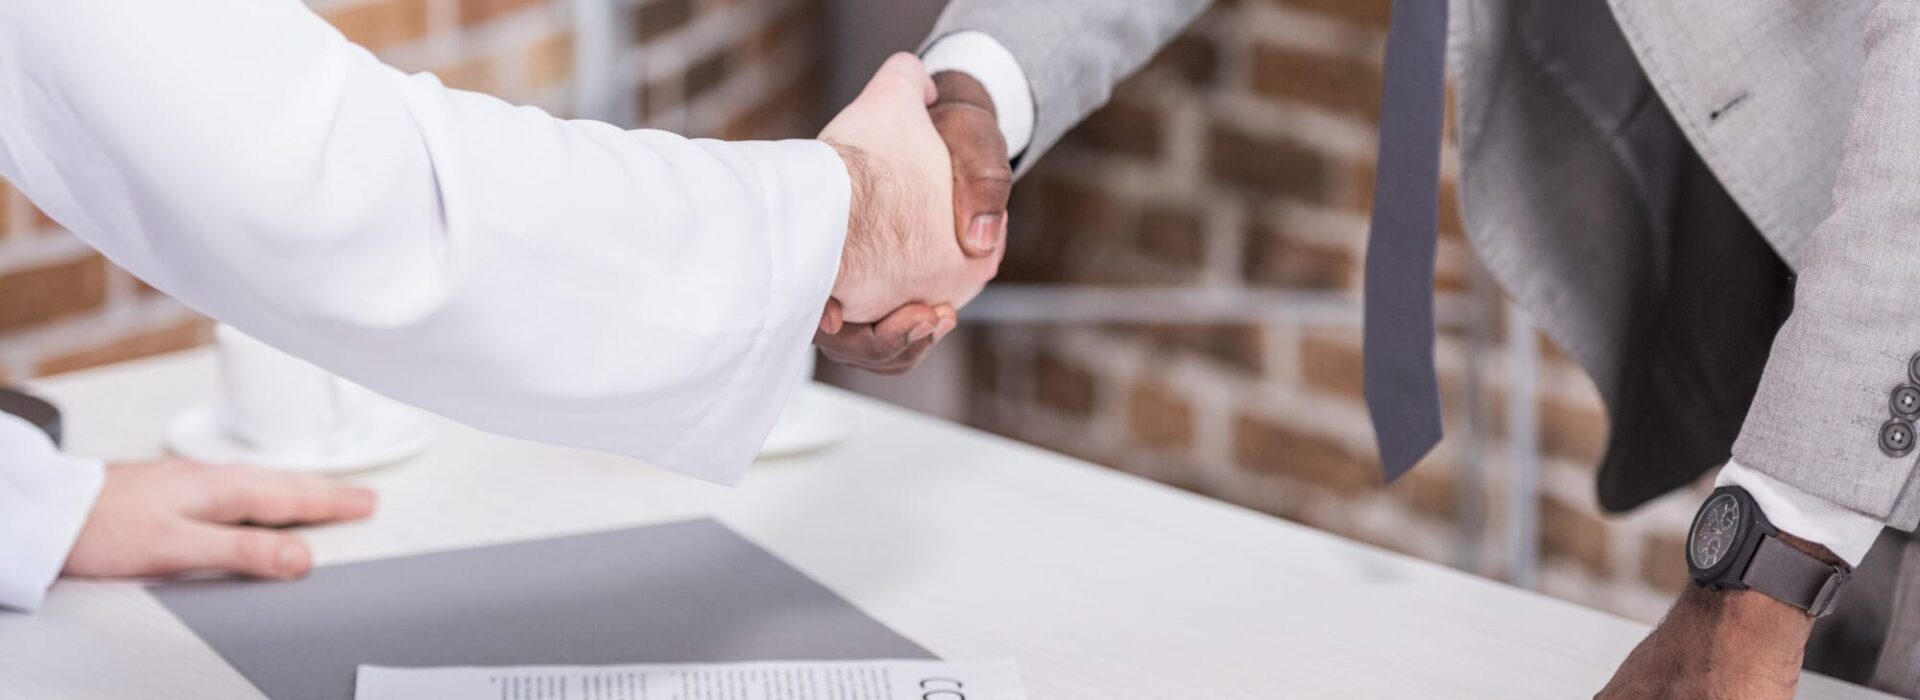 Multiethnic businessmen shaking hands before signing a non-compete agreement in office